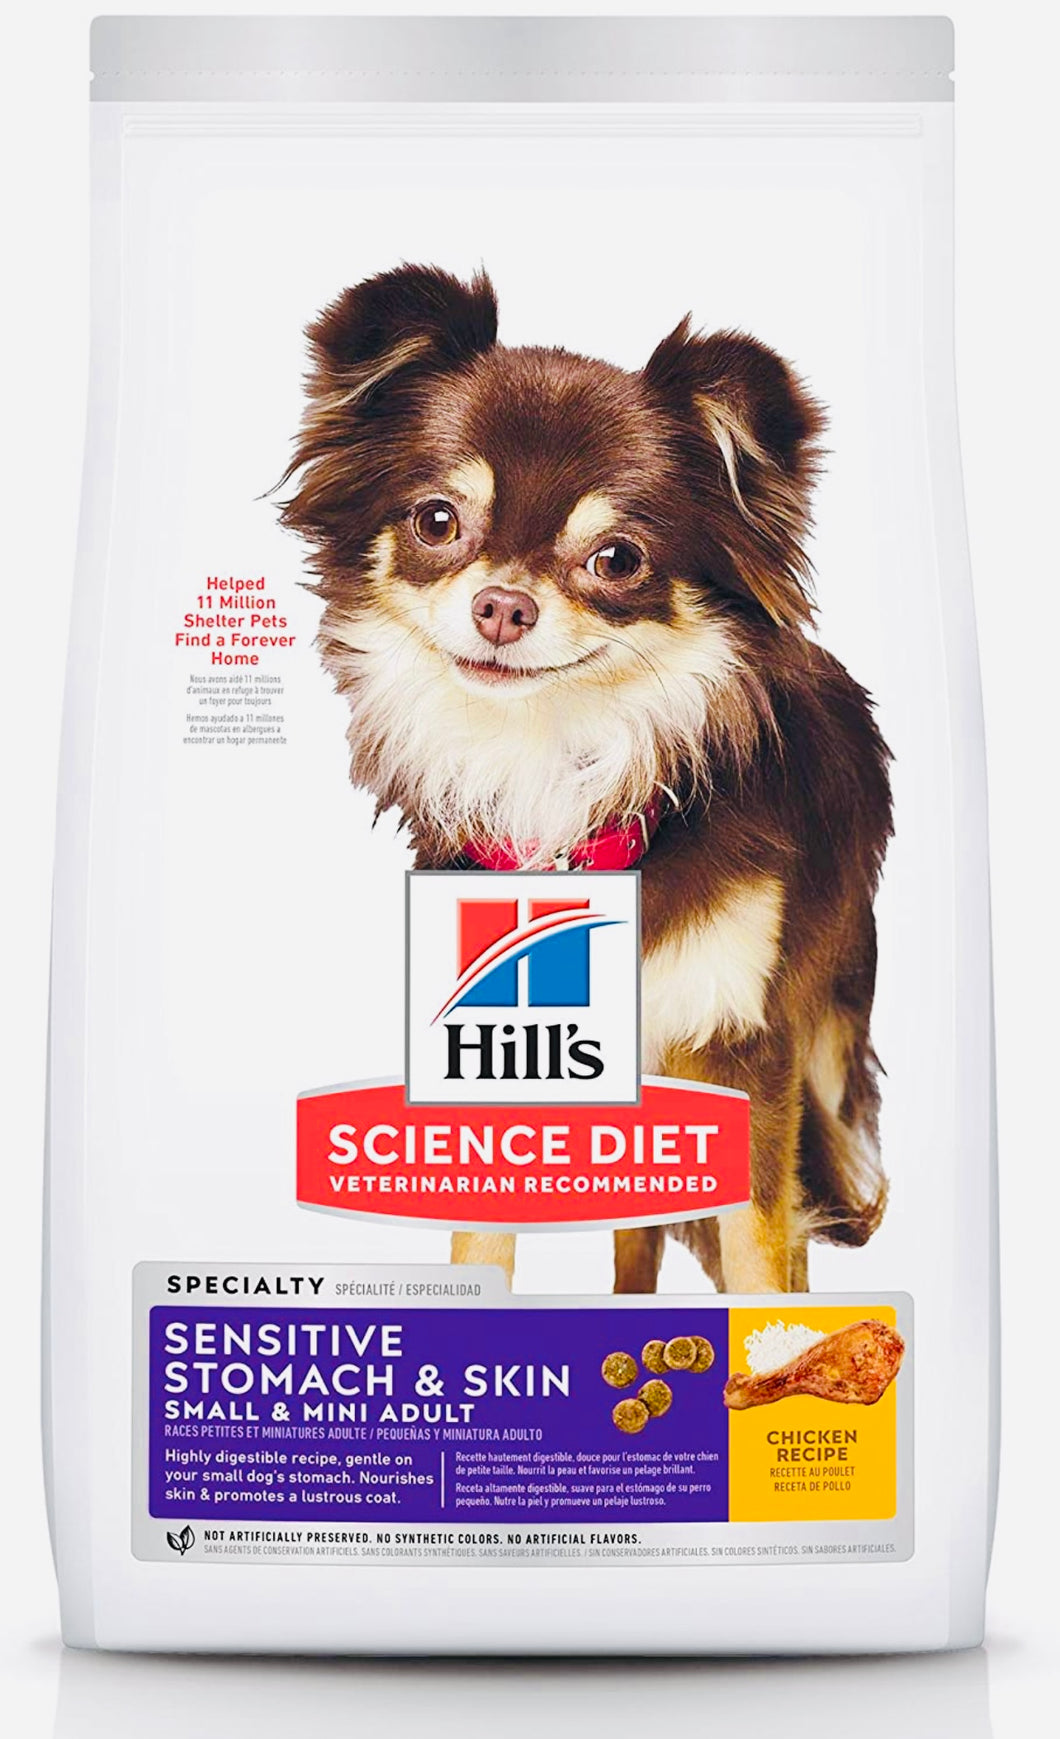 Hills science diet sensitive stomach and skin adult and mini chicken recipe dry cat food 6.8KG bag